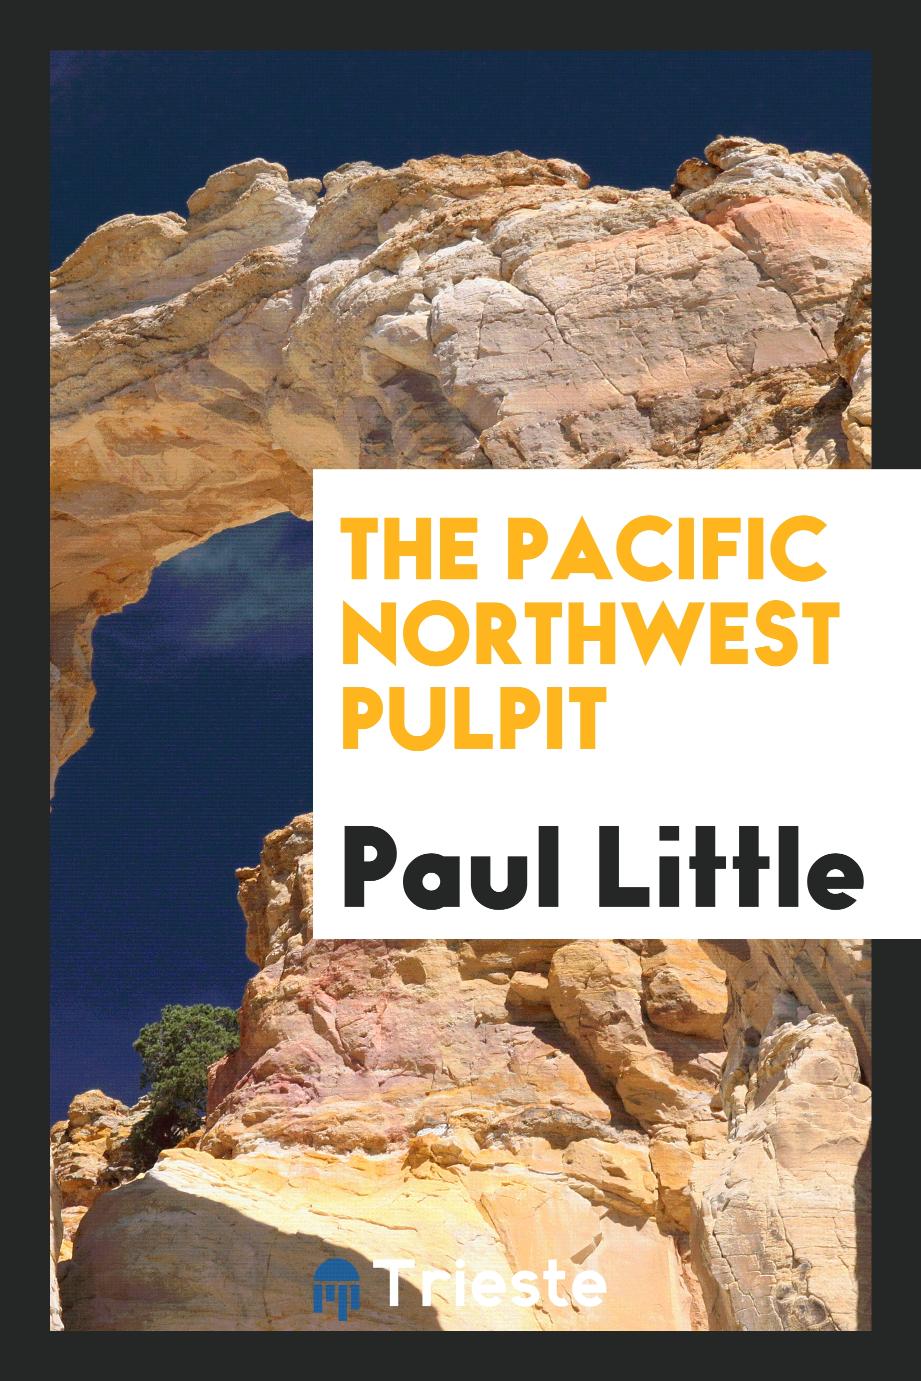 The Pacific northwest pulpit